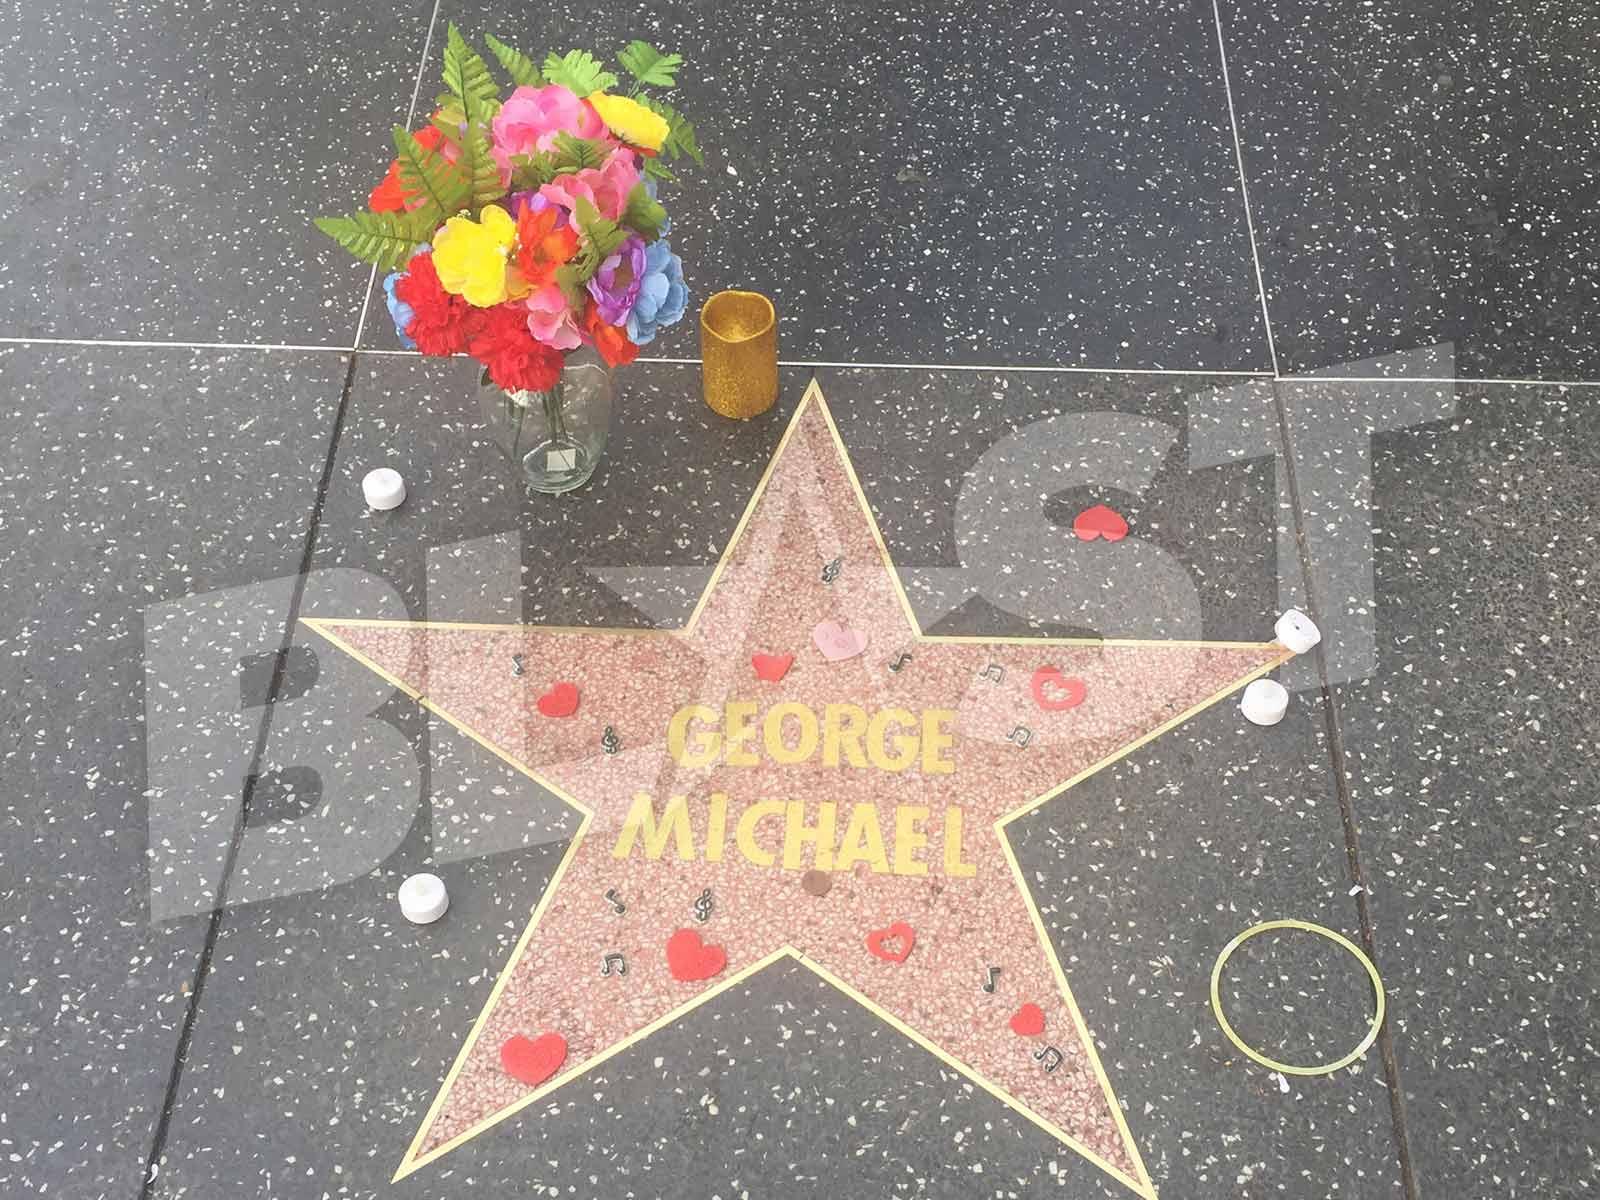 George Michael Gets Unofficial Posthumous Walk of Fame Star